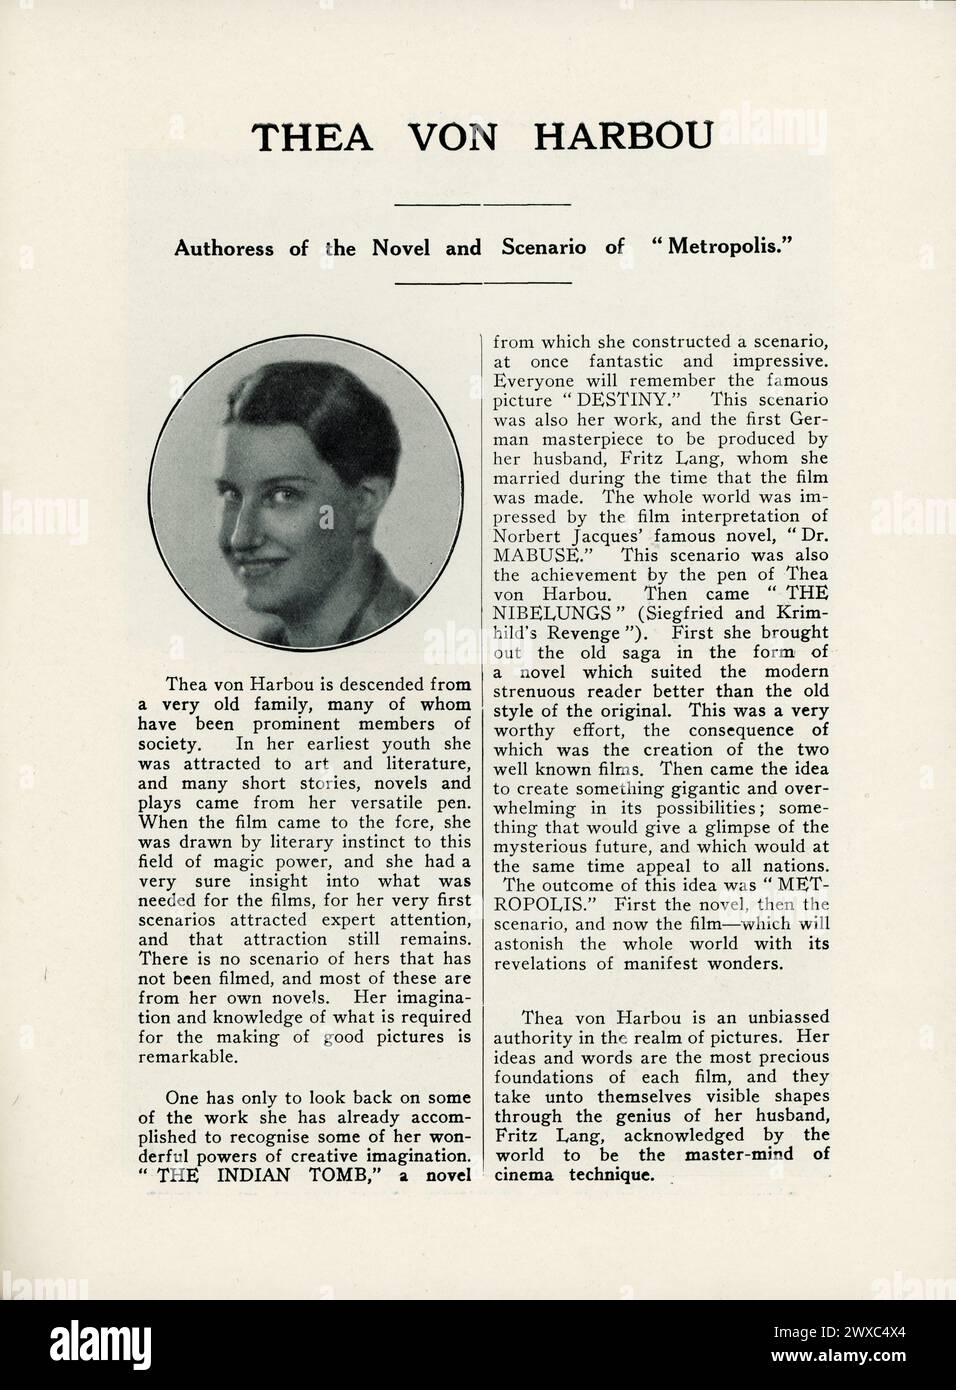 THEA VON HARBOU Author and Scenarist in page from original release British programme for METROPOLIS 1927 director FRITZ LANG novel and screenplay Thea von Harbou Universum Film (UFA) Stock Photo